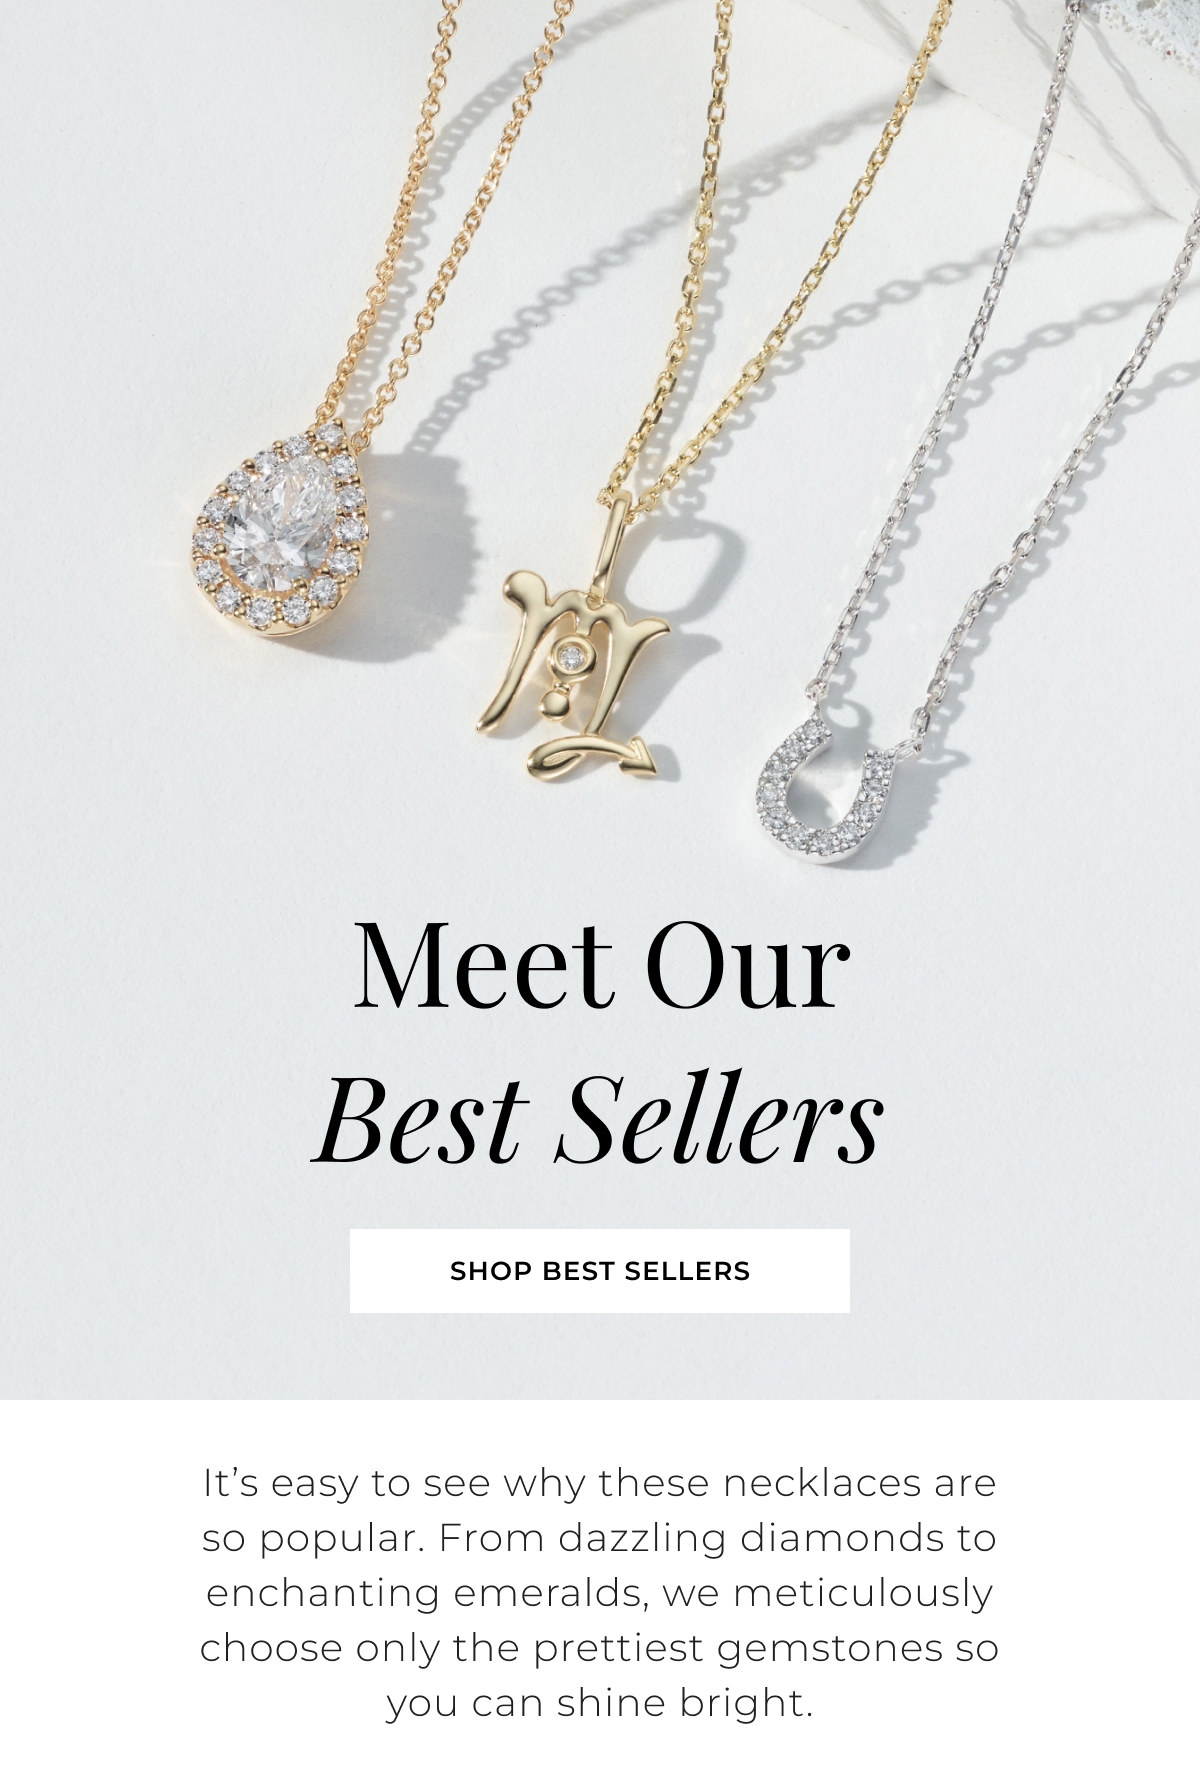 Meet Our Best Sellers - Its easy to see why these necklaces are so popular. From dazzling diamonds to enchanting emeralds, we meticulously choose only the prettiest gemstones so you can shine bright. Shop Best Sellers >